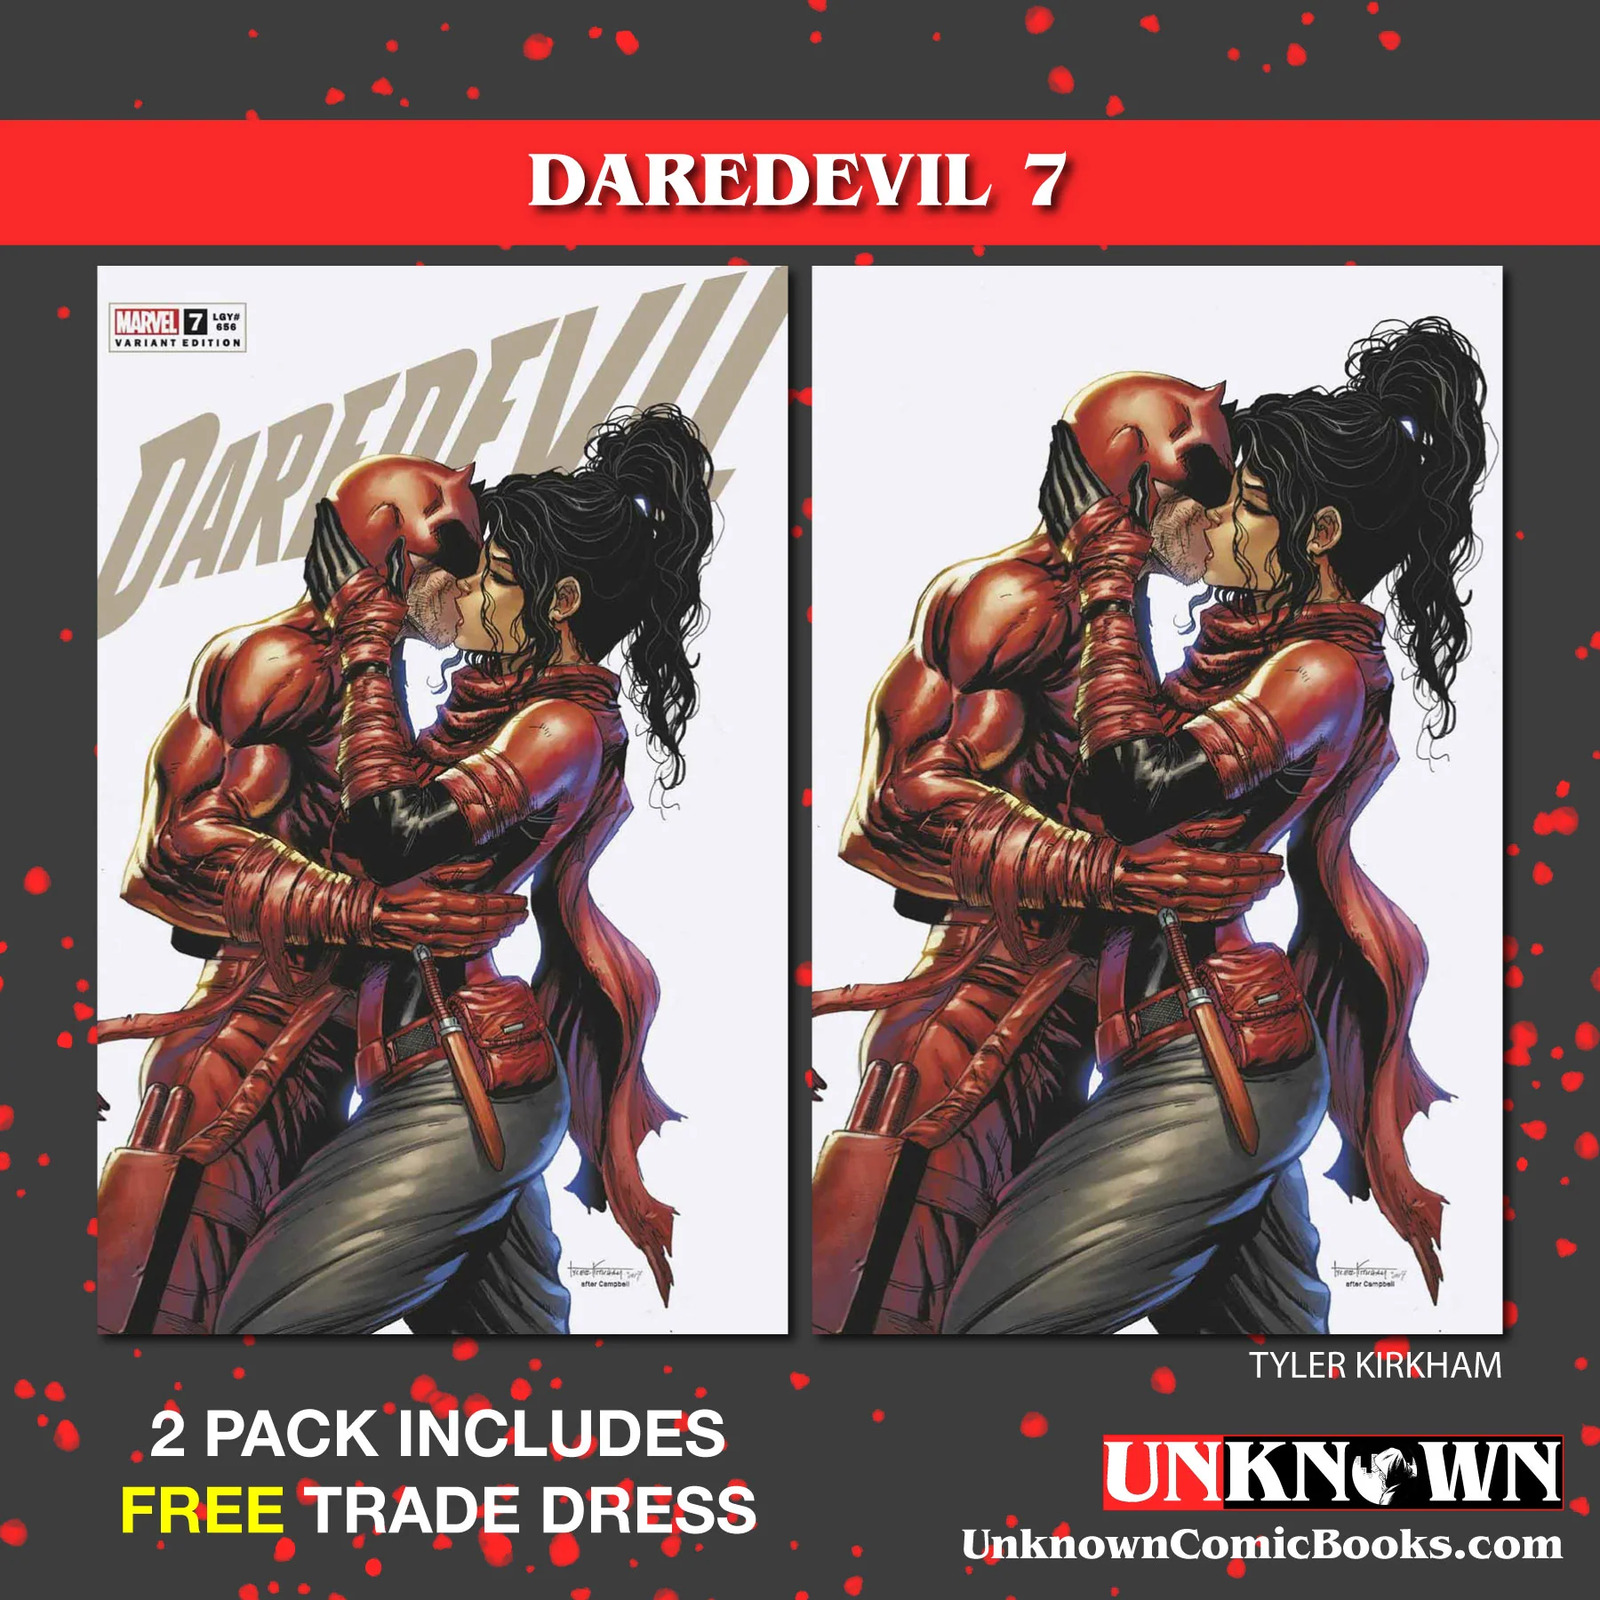 2 PACK **FREE TRADE DRESS** DAREDEVIL #7 UNKNOWN COMICS TYLER KIRKHAM EXCLUSIVE